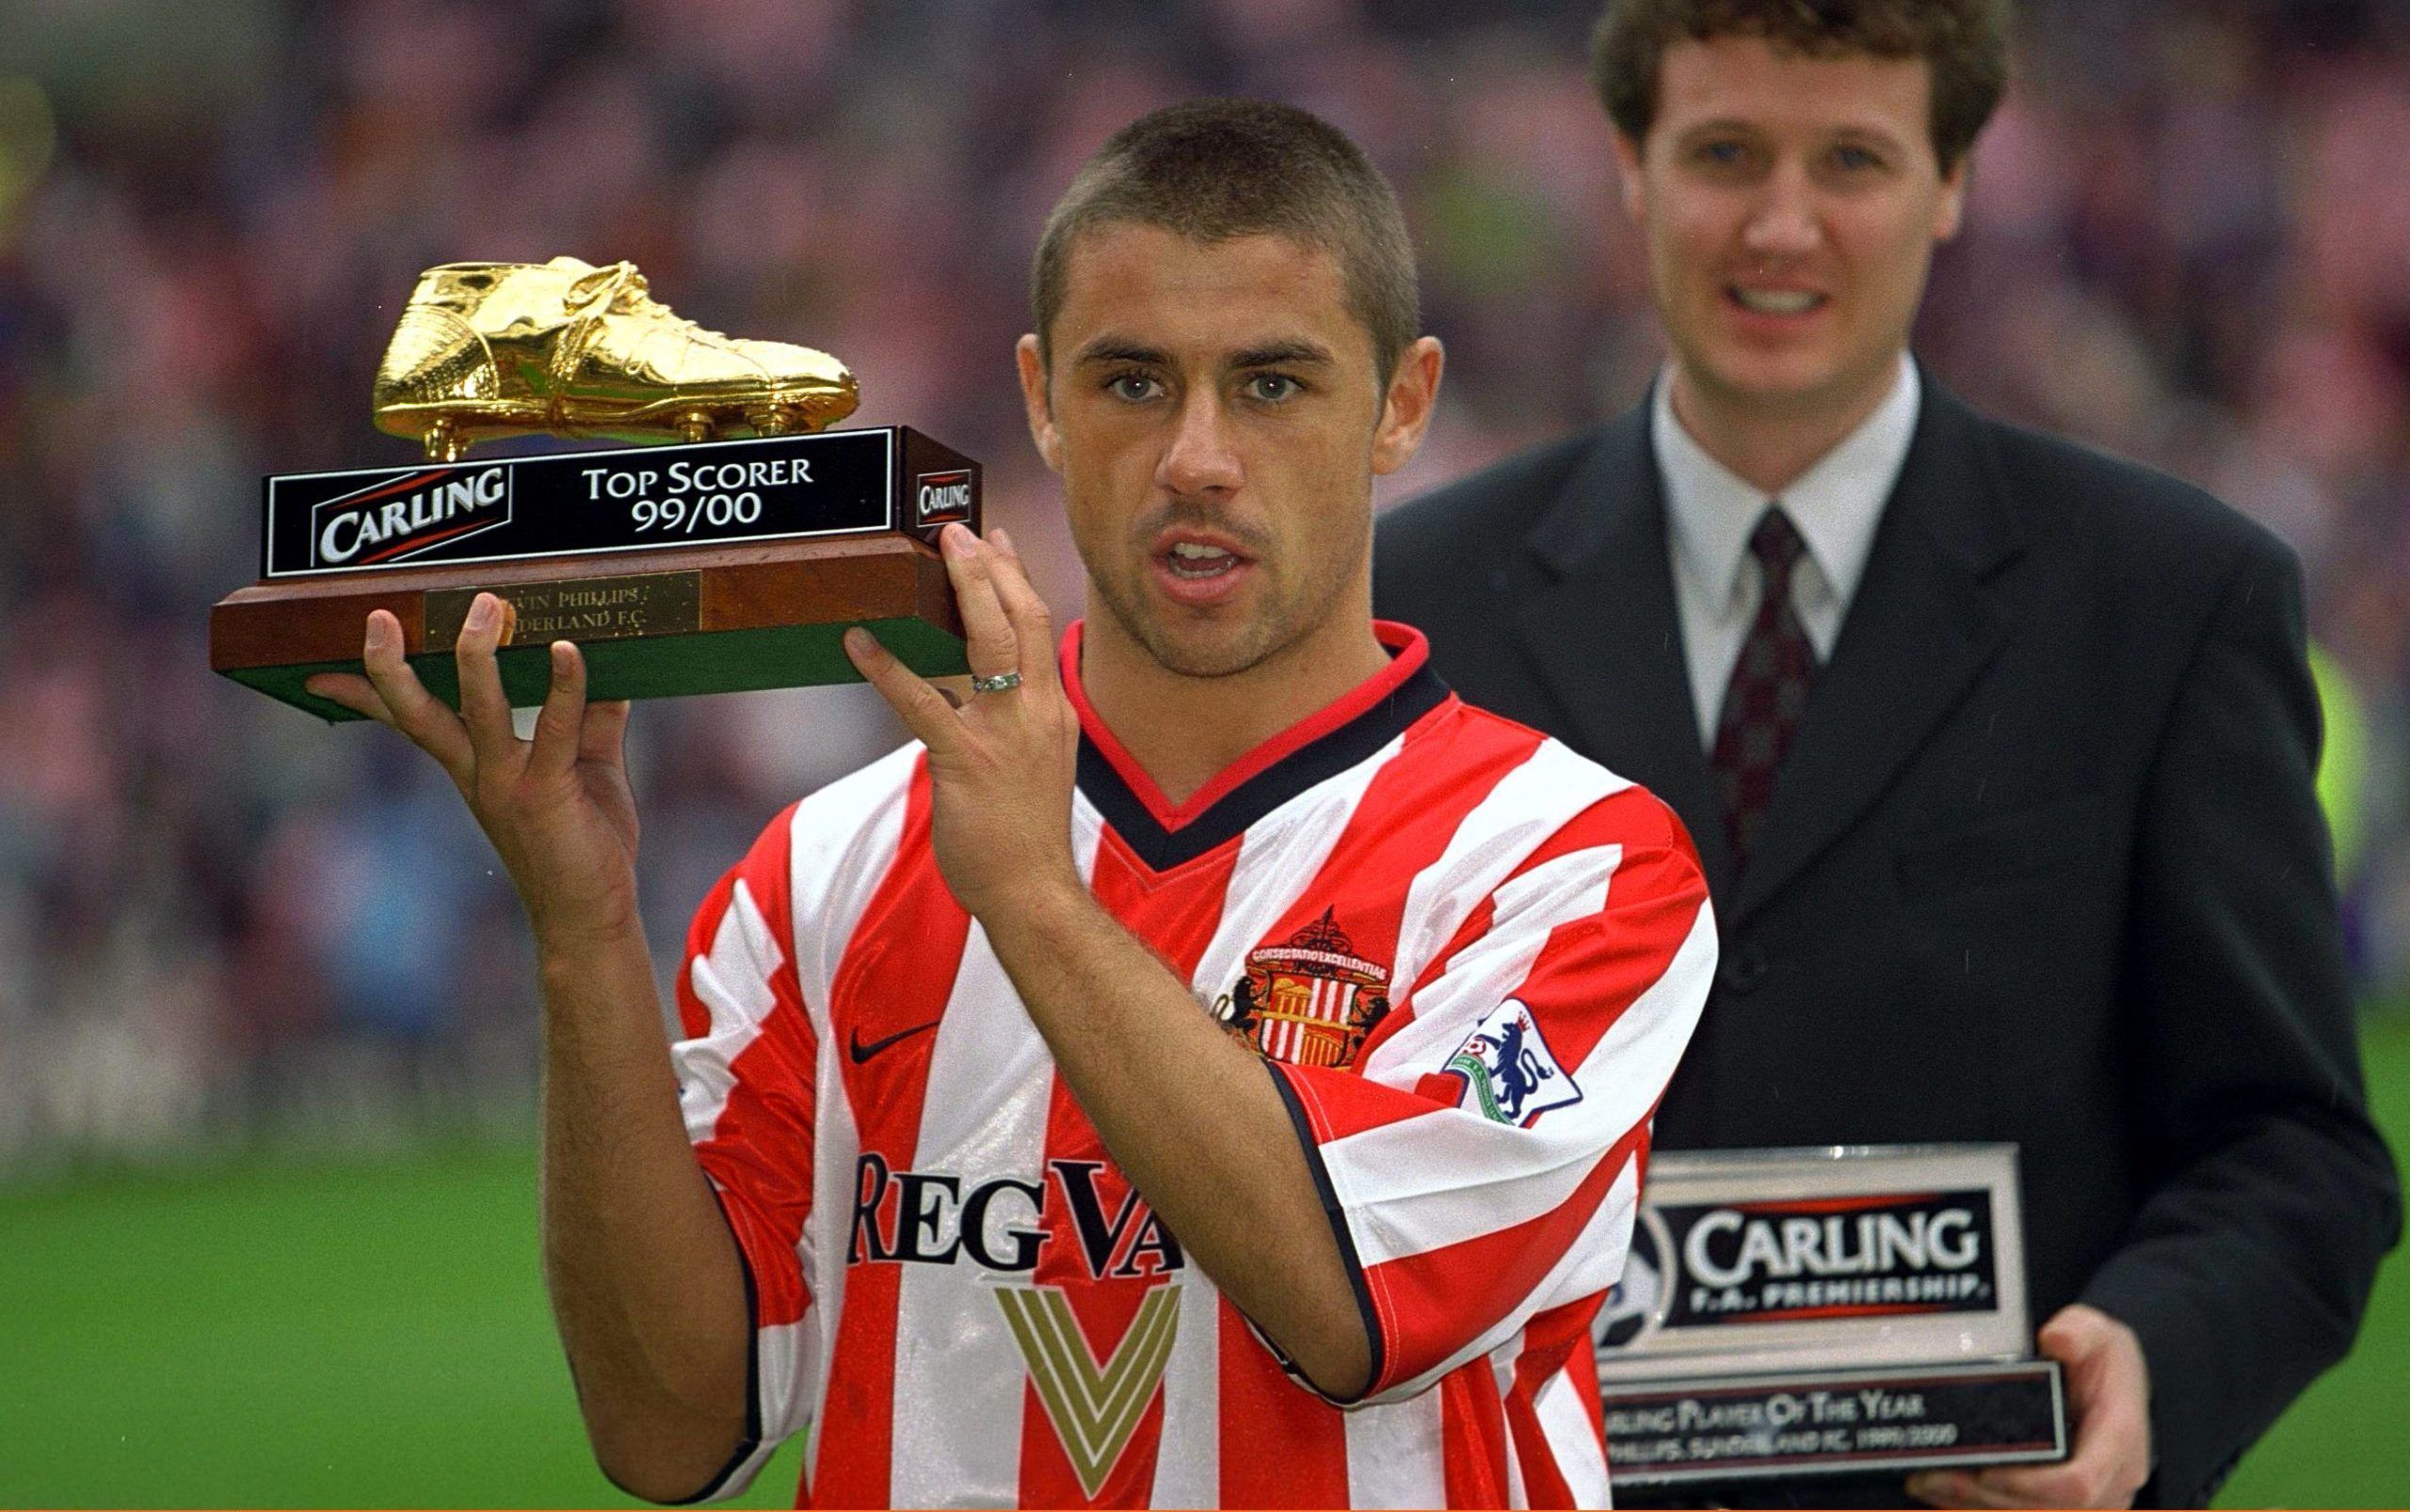 Football - Stock Season 00/01 
Mandatory Credit: Action Images / David Davies 
Sunderland's Kevin Phillips collects the award for the Top League GoalScorer